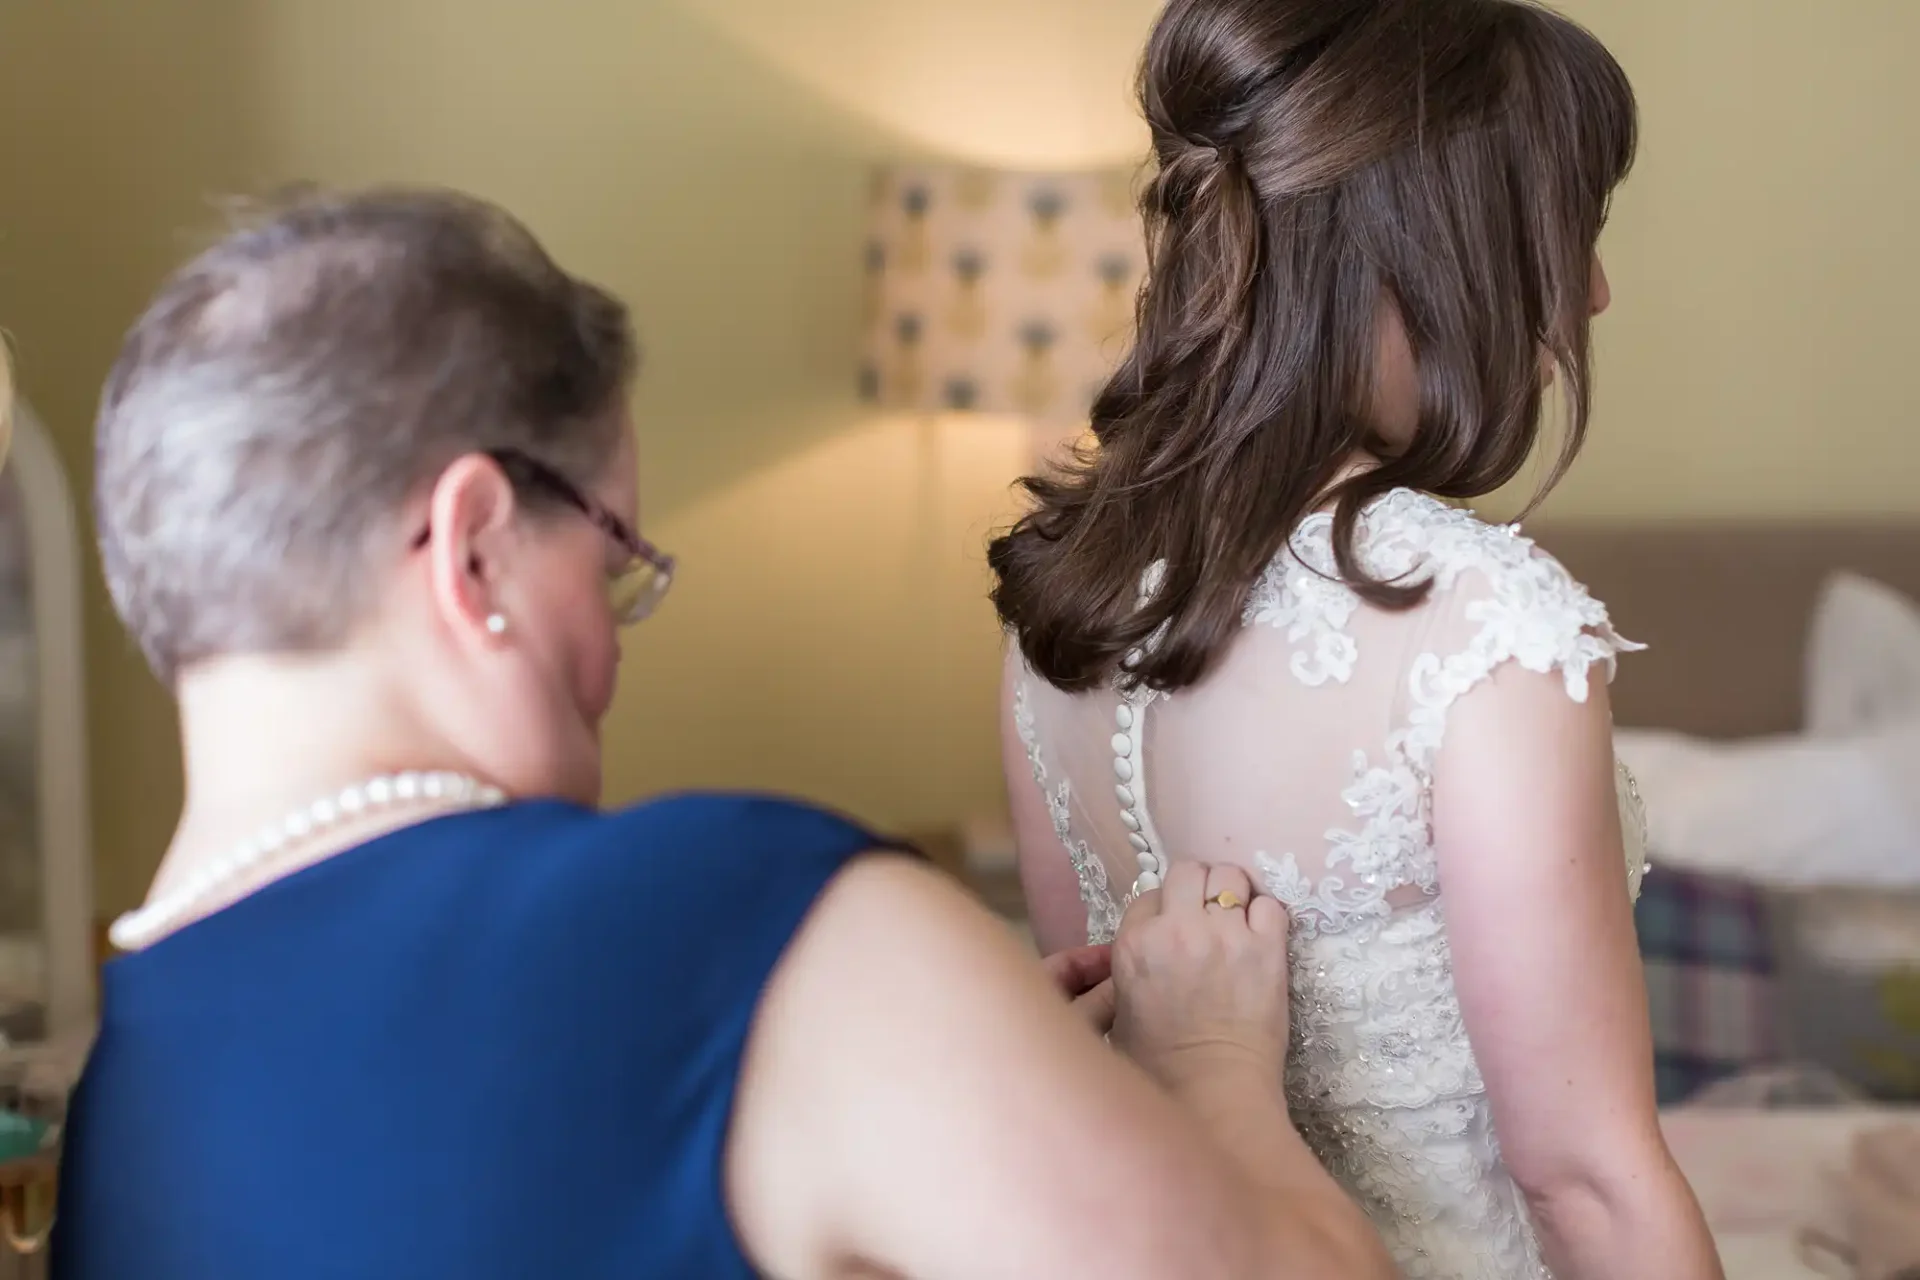 A woman in a blue dress is helping a bride, seen from behind, with the final buttoning of her detailed lace wedding gown in a softly lit room.